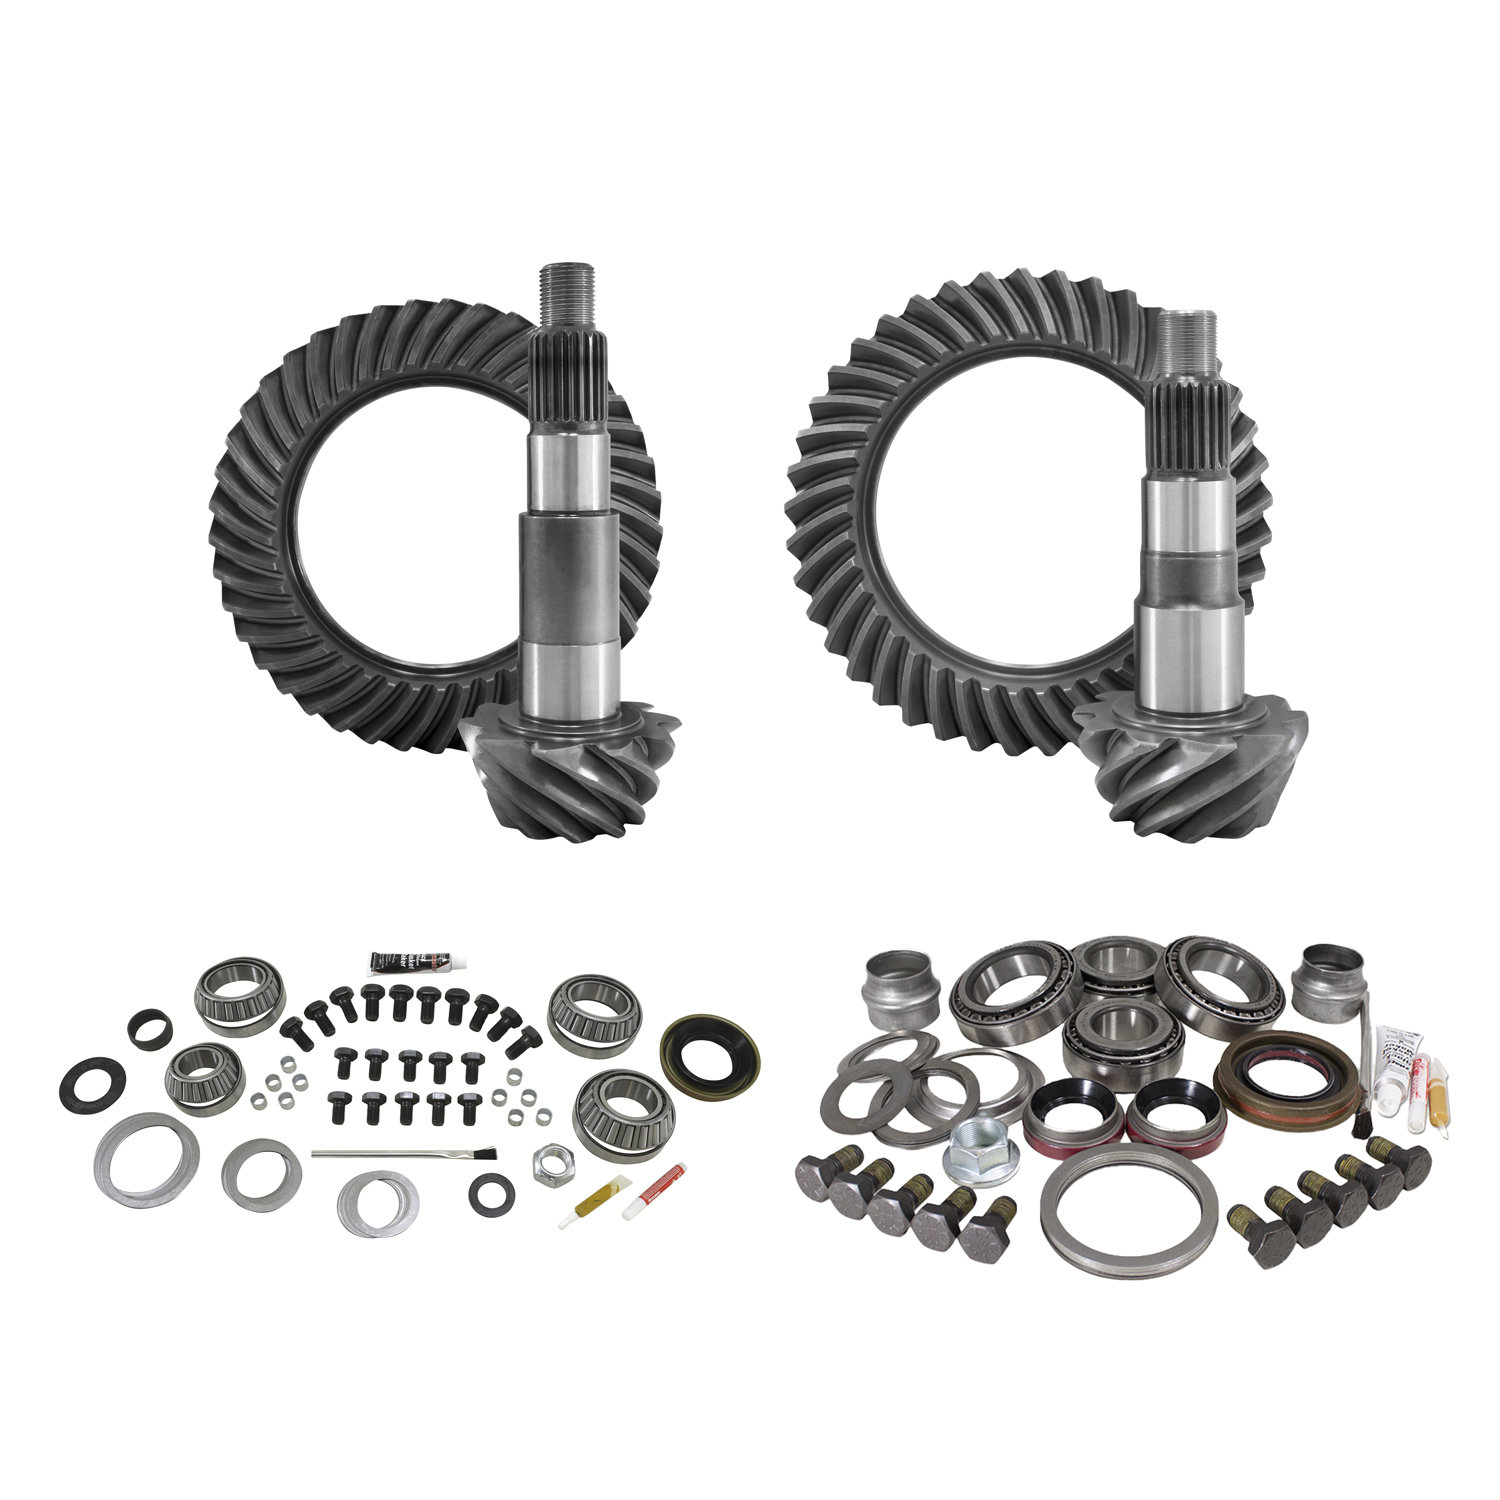 Yukon Gear & Axle Front & Rear Ring and Pinion with Master Install Kits for  Jeep Wrangler JK Rubicon with Dana 44 Front / Dana 44 Rear